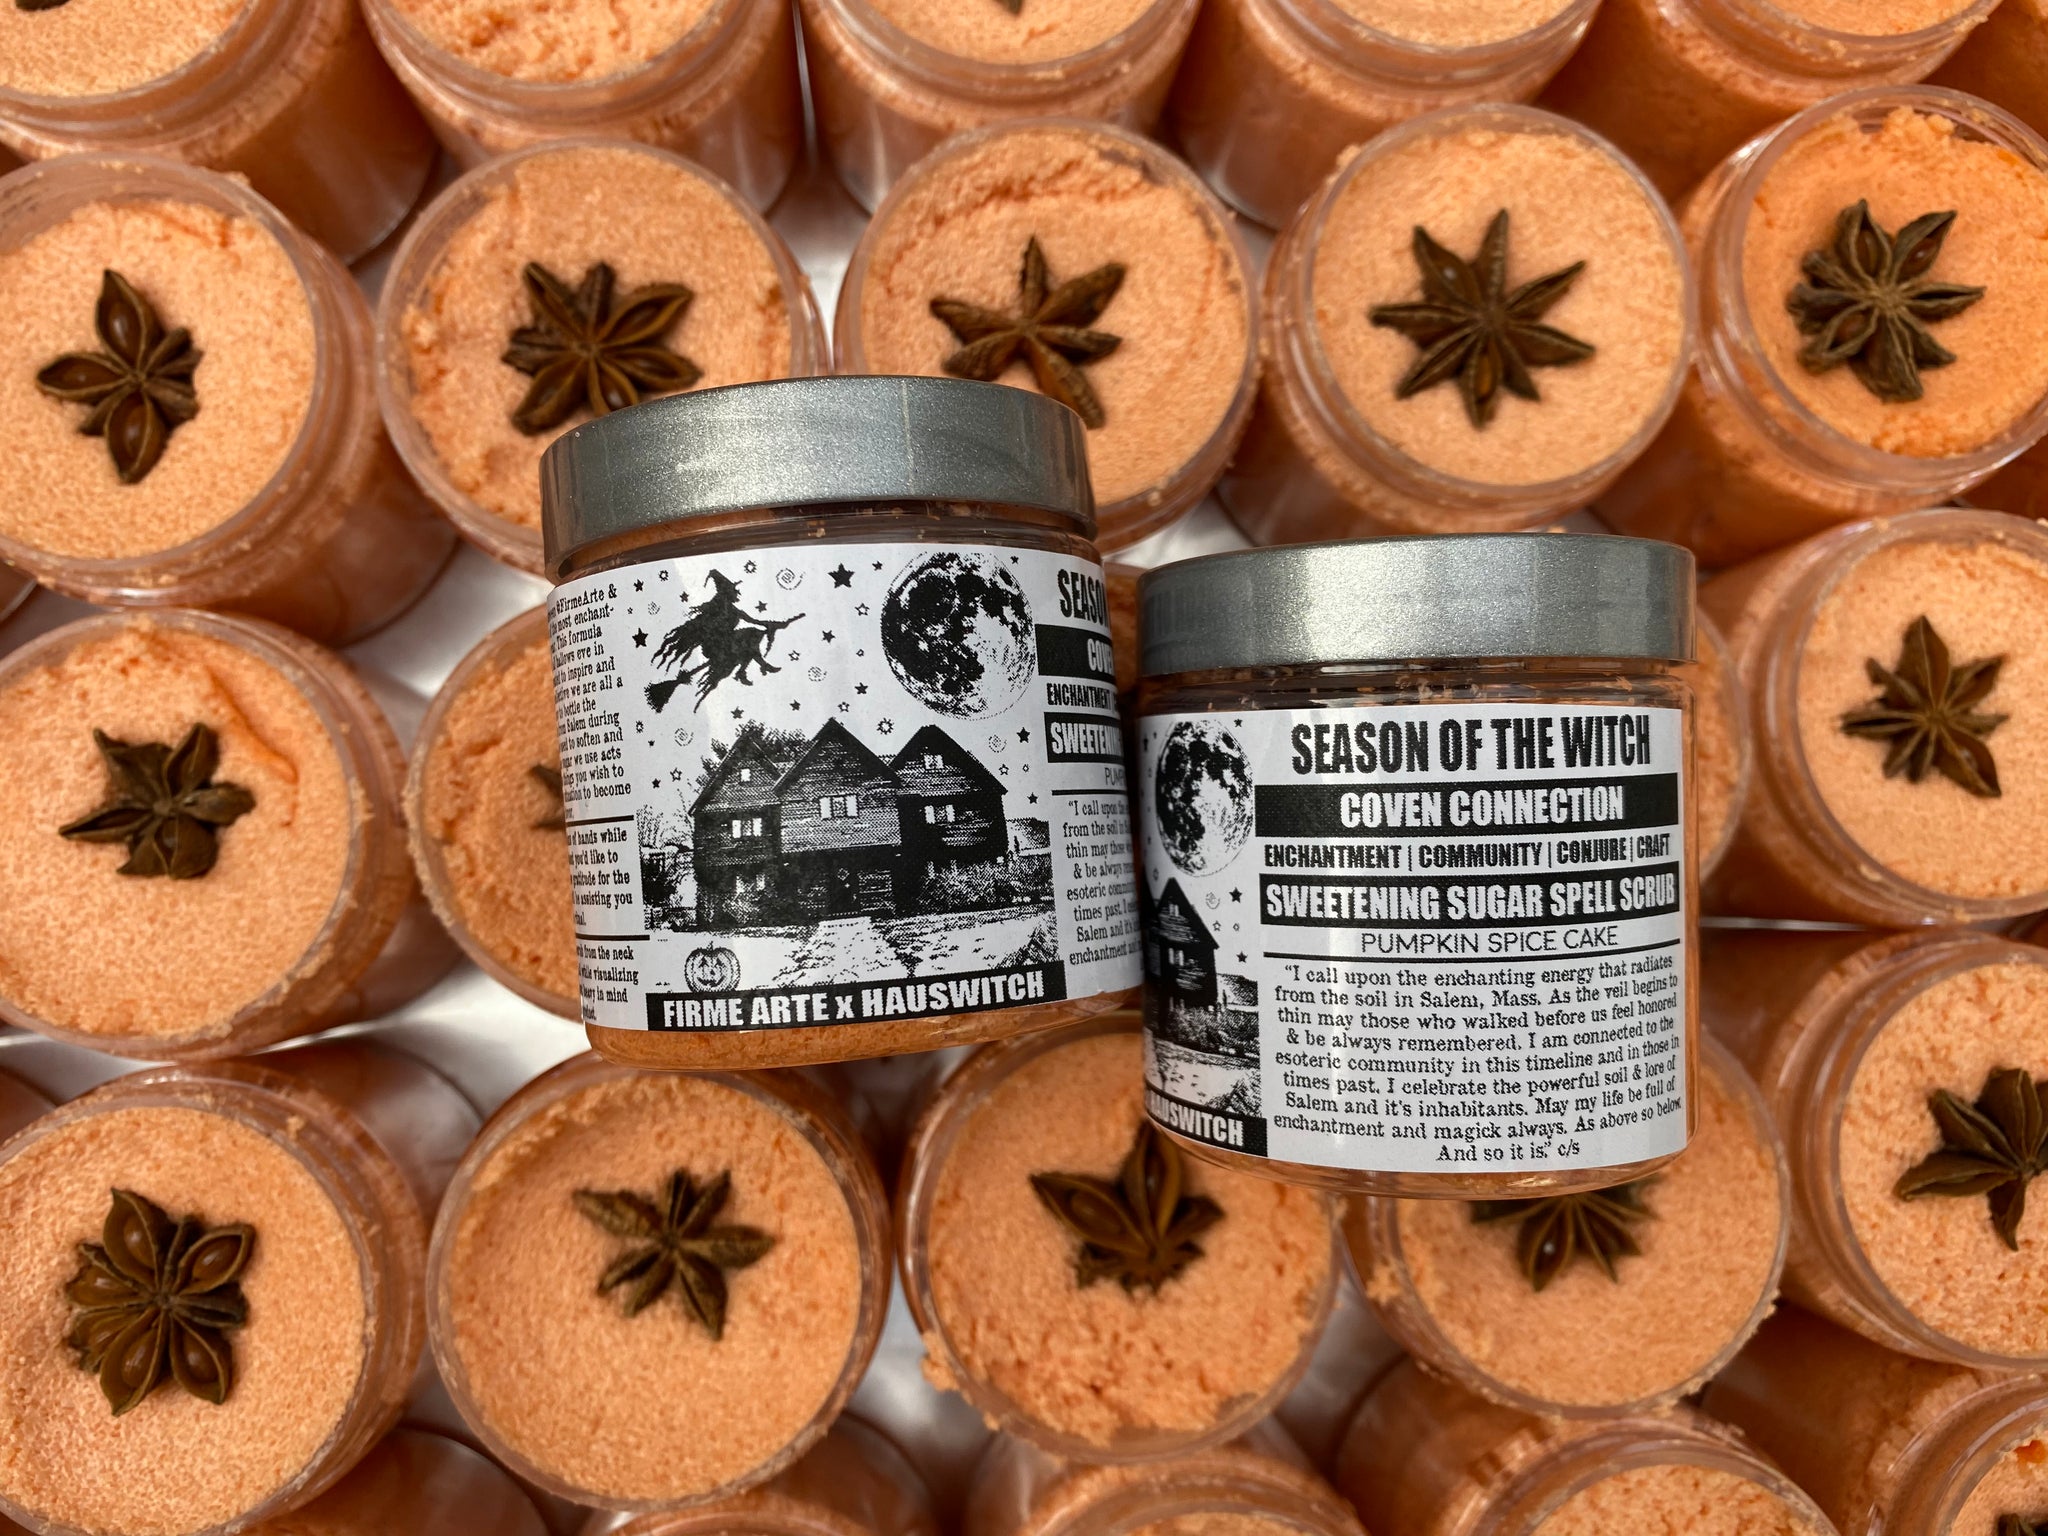 Sugar Spell Scrub | Season Of The Witch | Coven Connection | @HausWitch Collab!